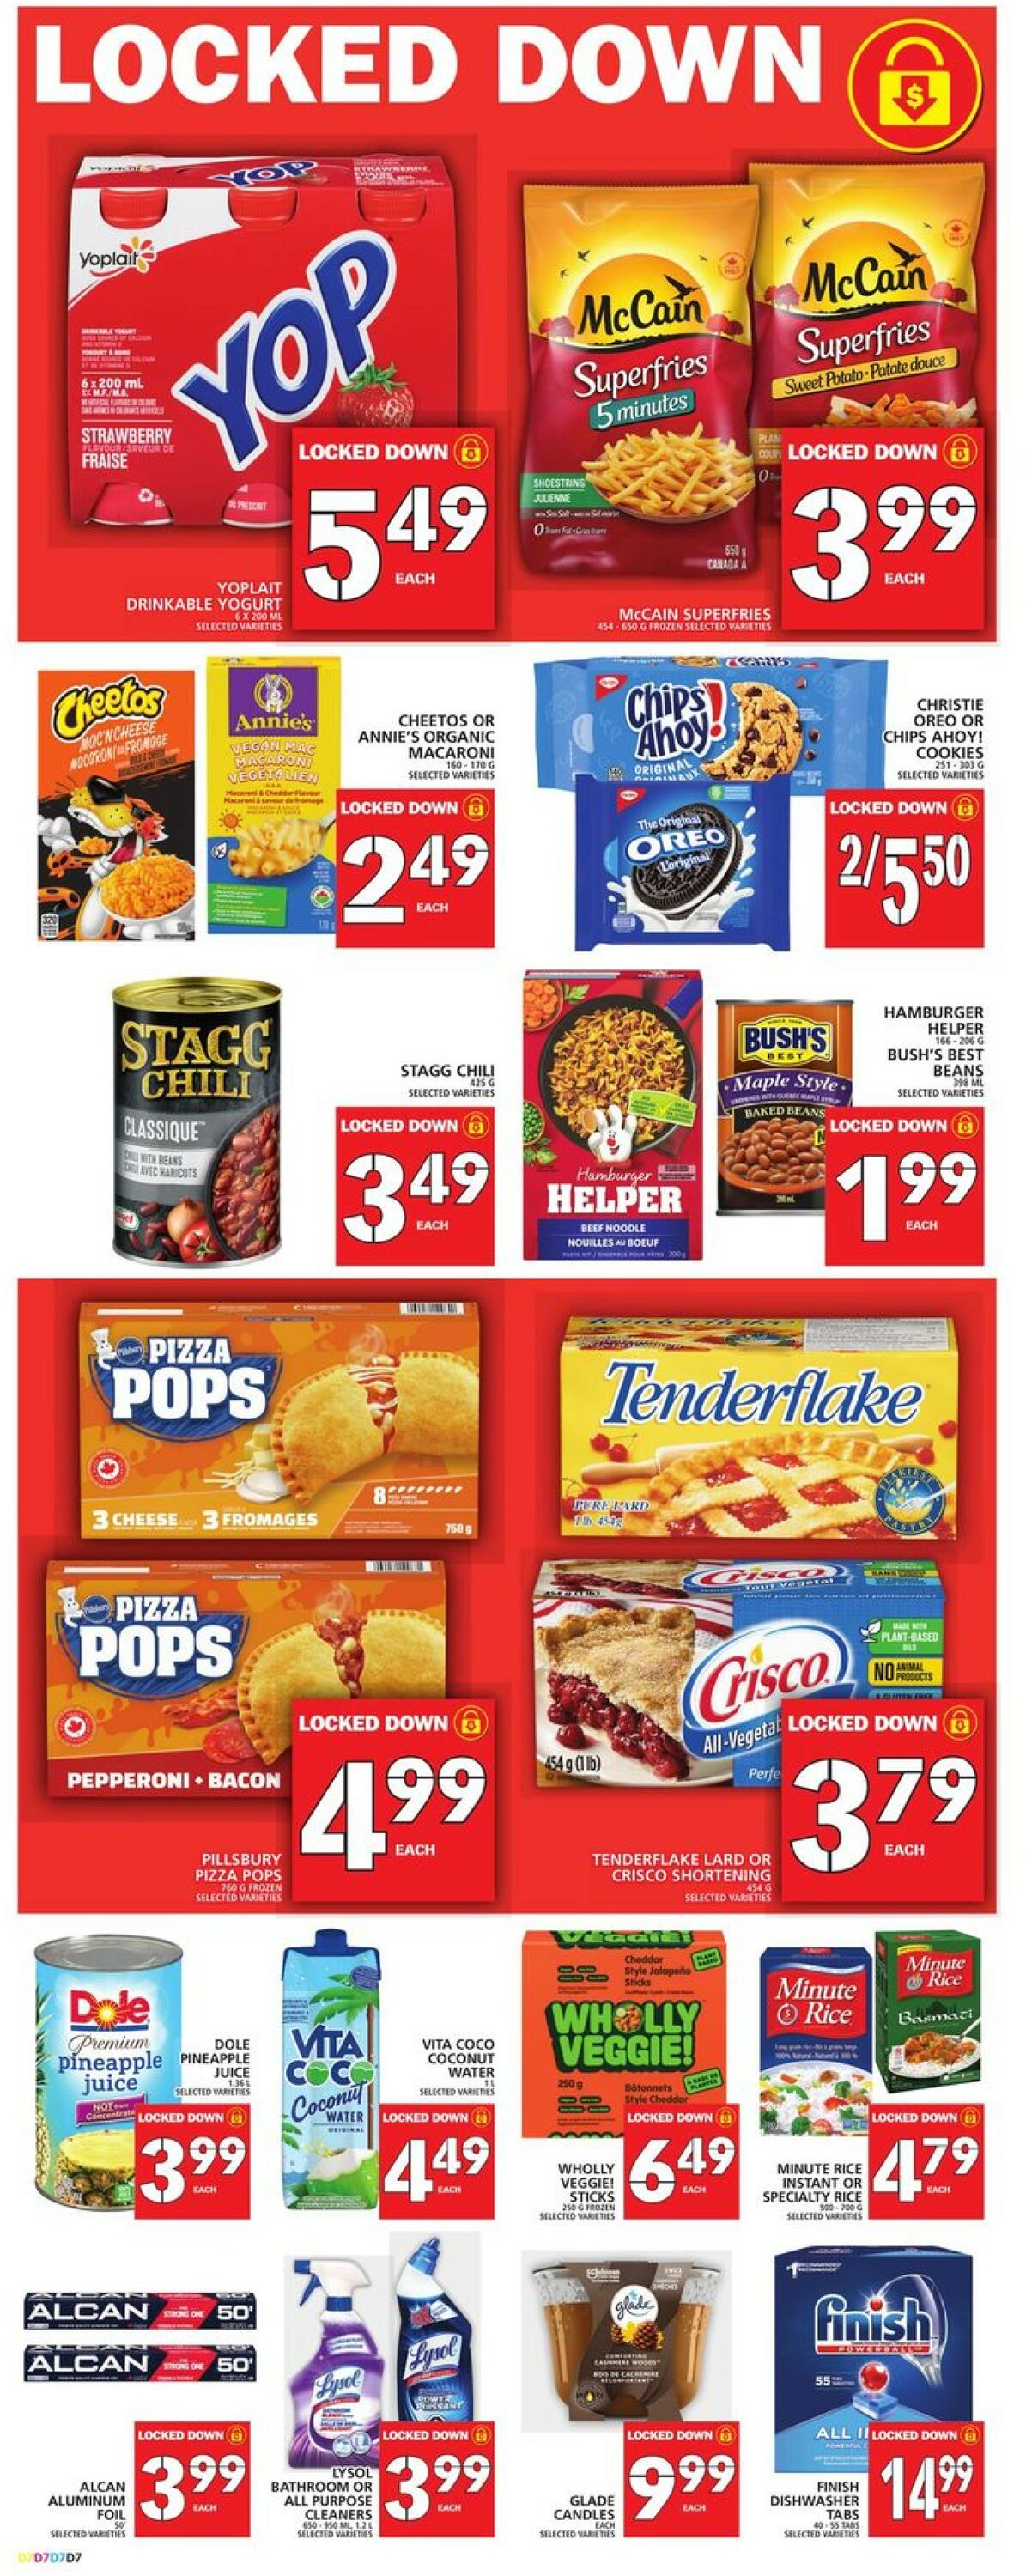 Food Basics Flyer from 12/29/2022